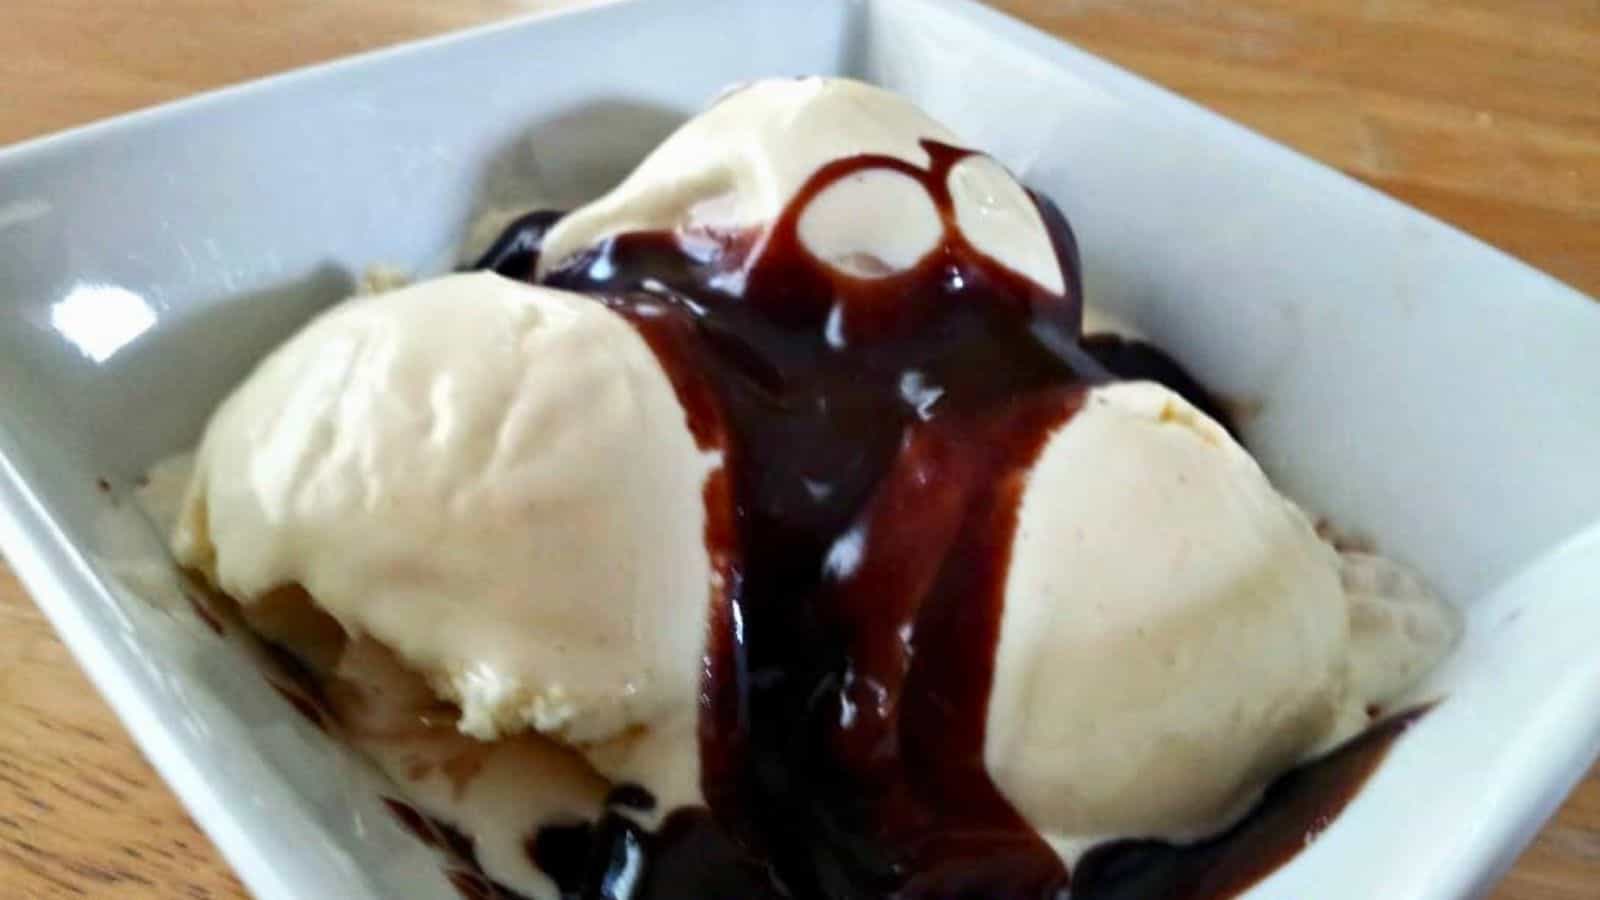 Image shows A bowl of vanilla ice cream topped with chocolate syrup on a wooden table.